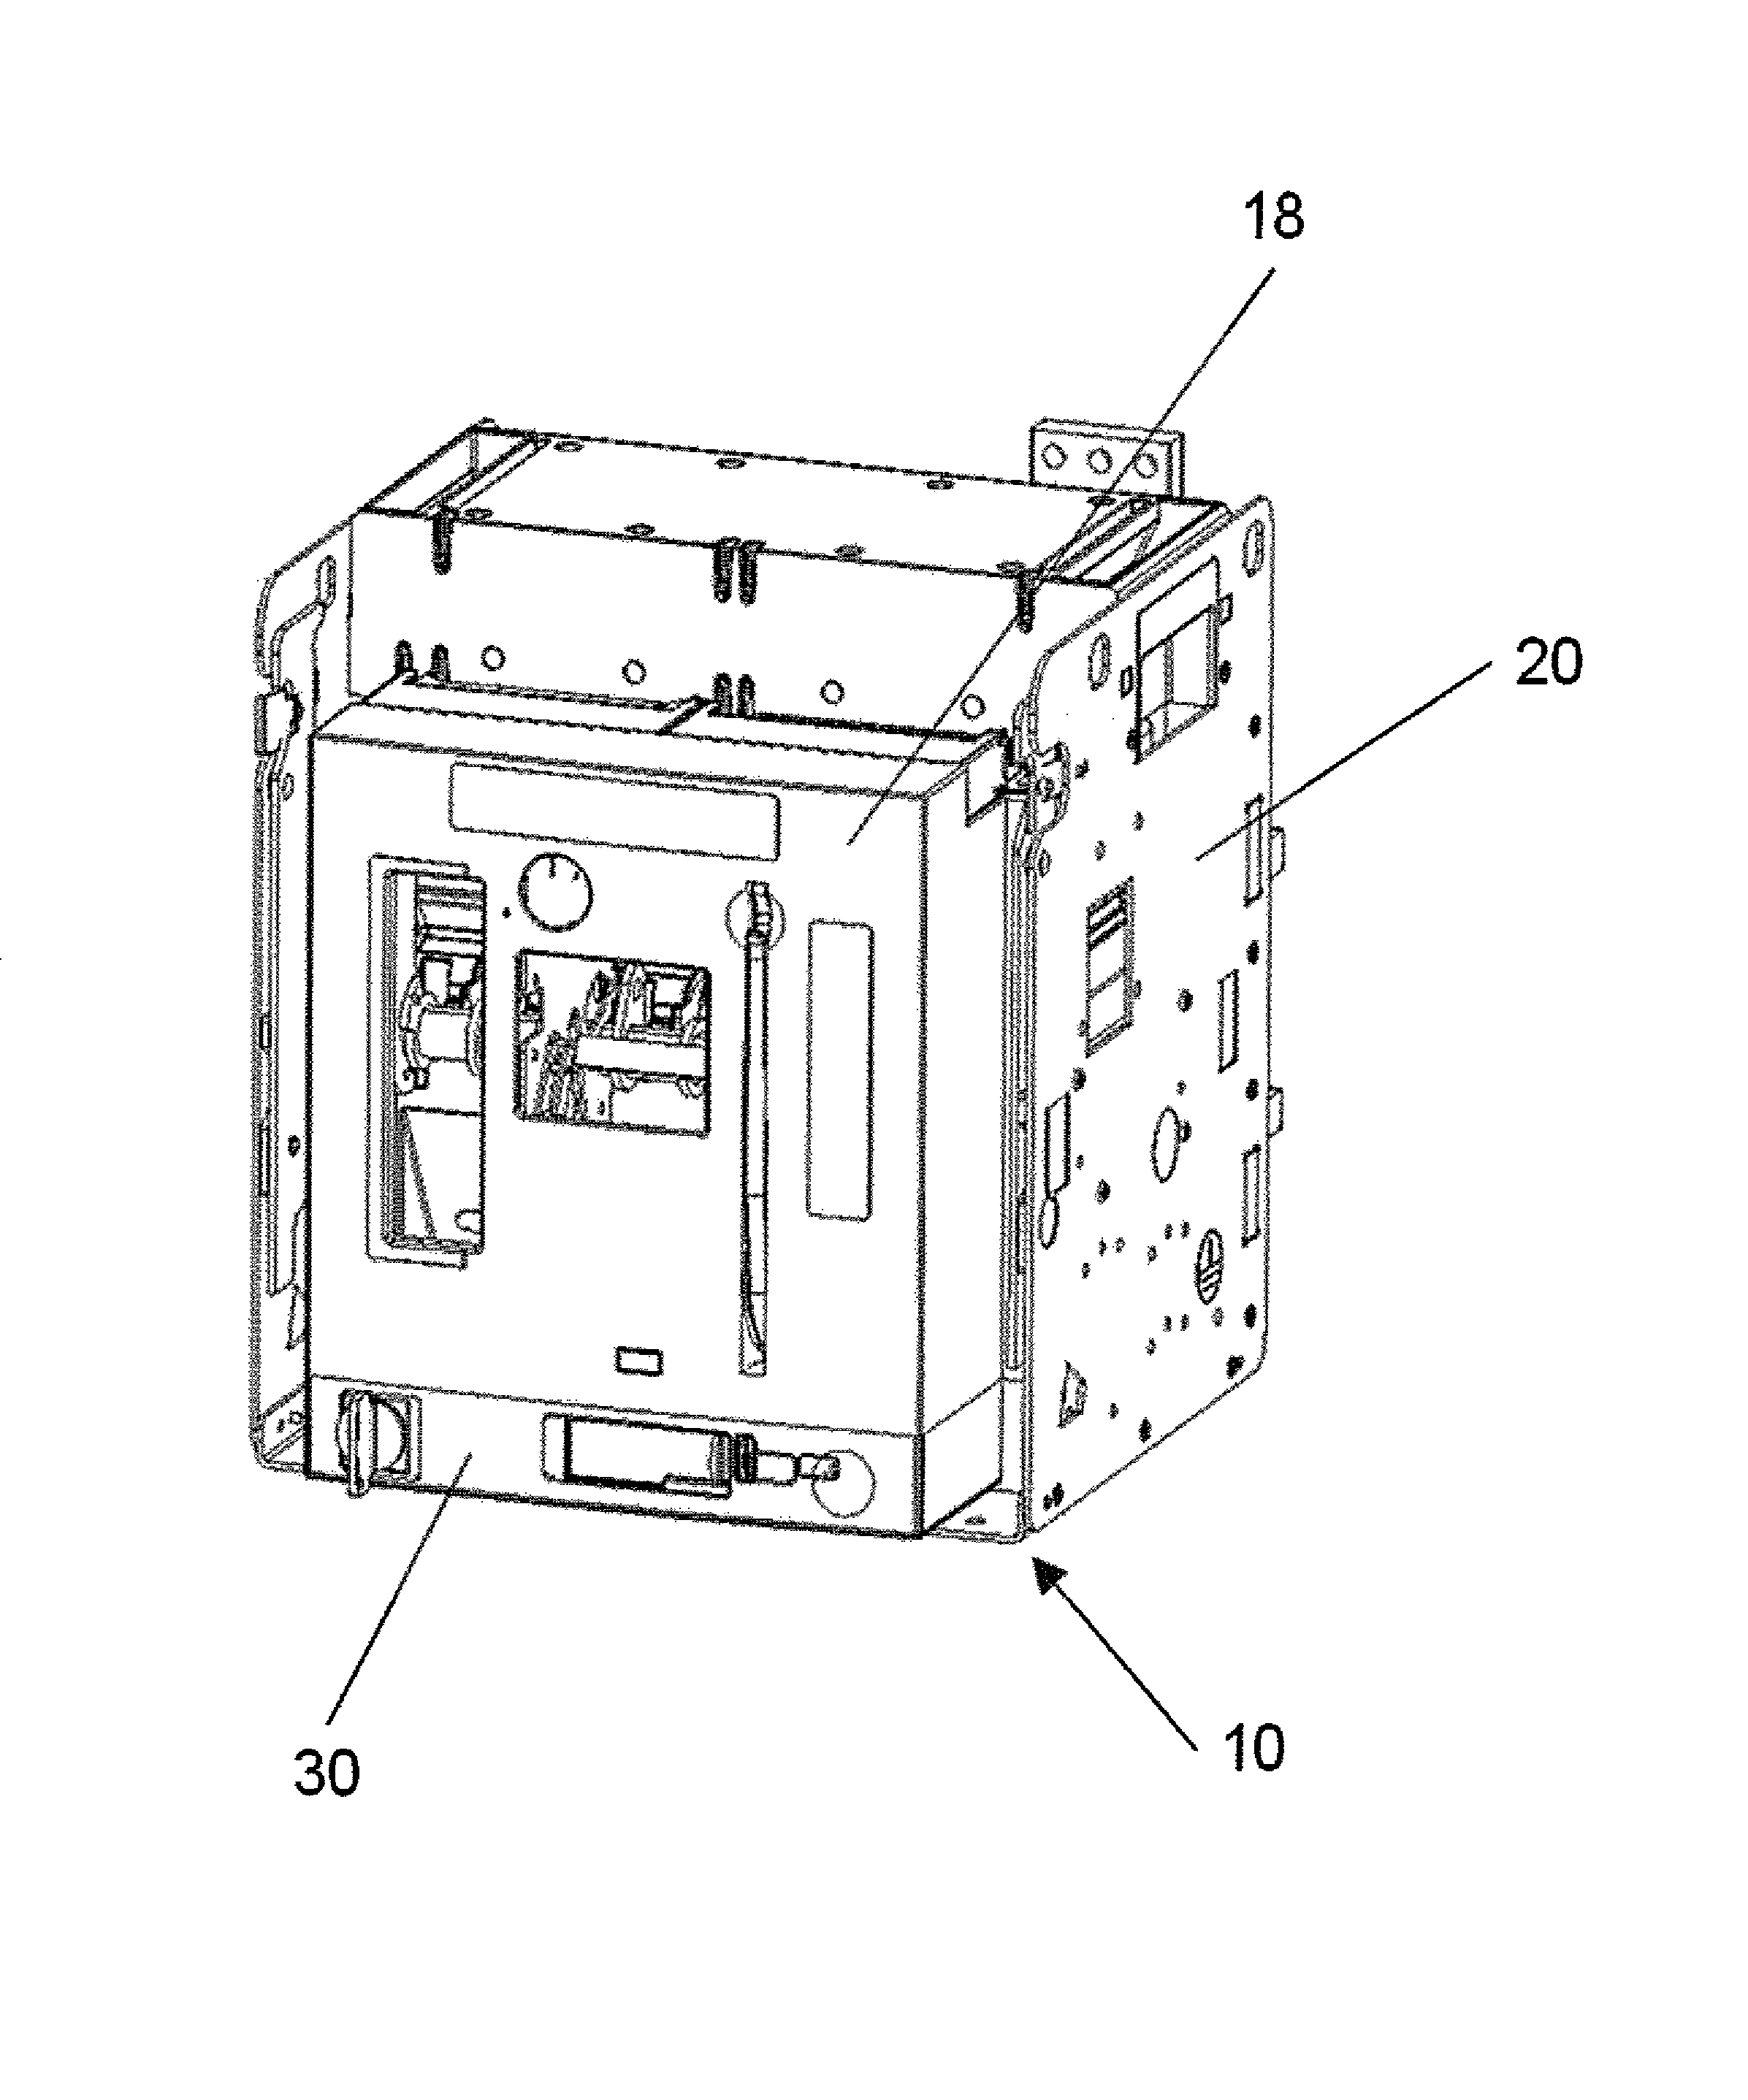 Withdrawable unit for an electric switching device